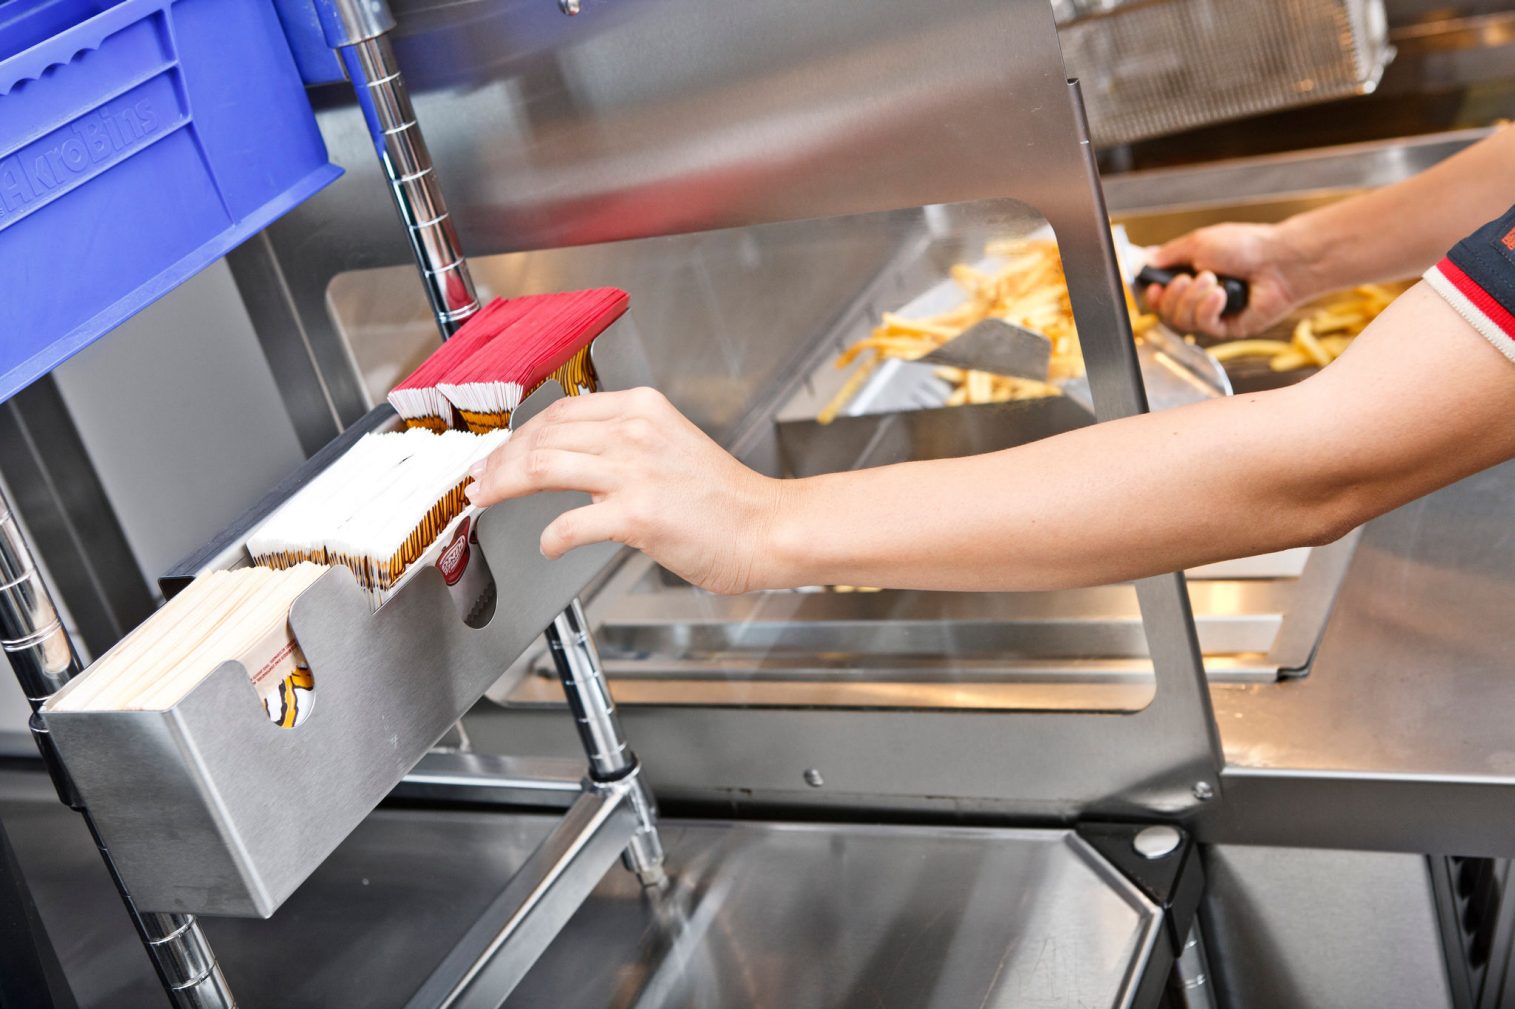 A kitchen worker pulls a french fry bag from a holder while using a scoop to gather fries